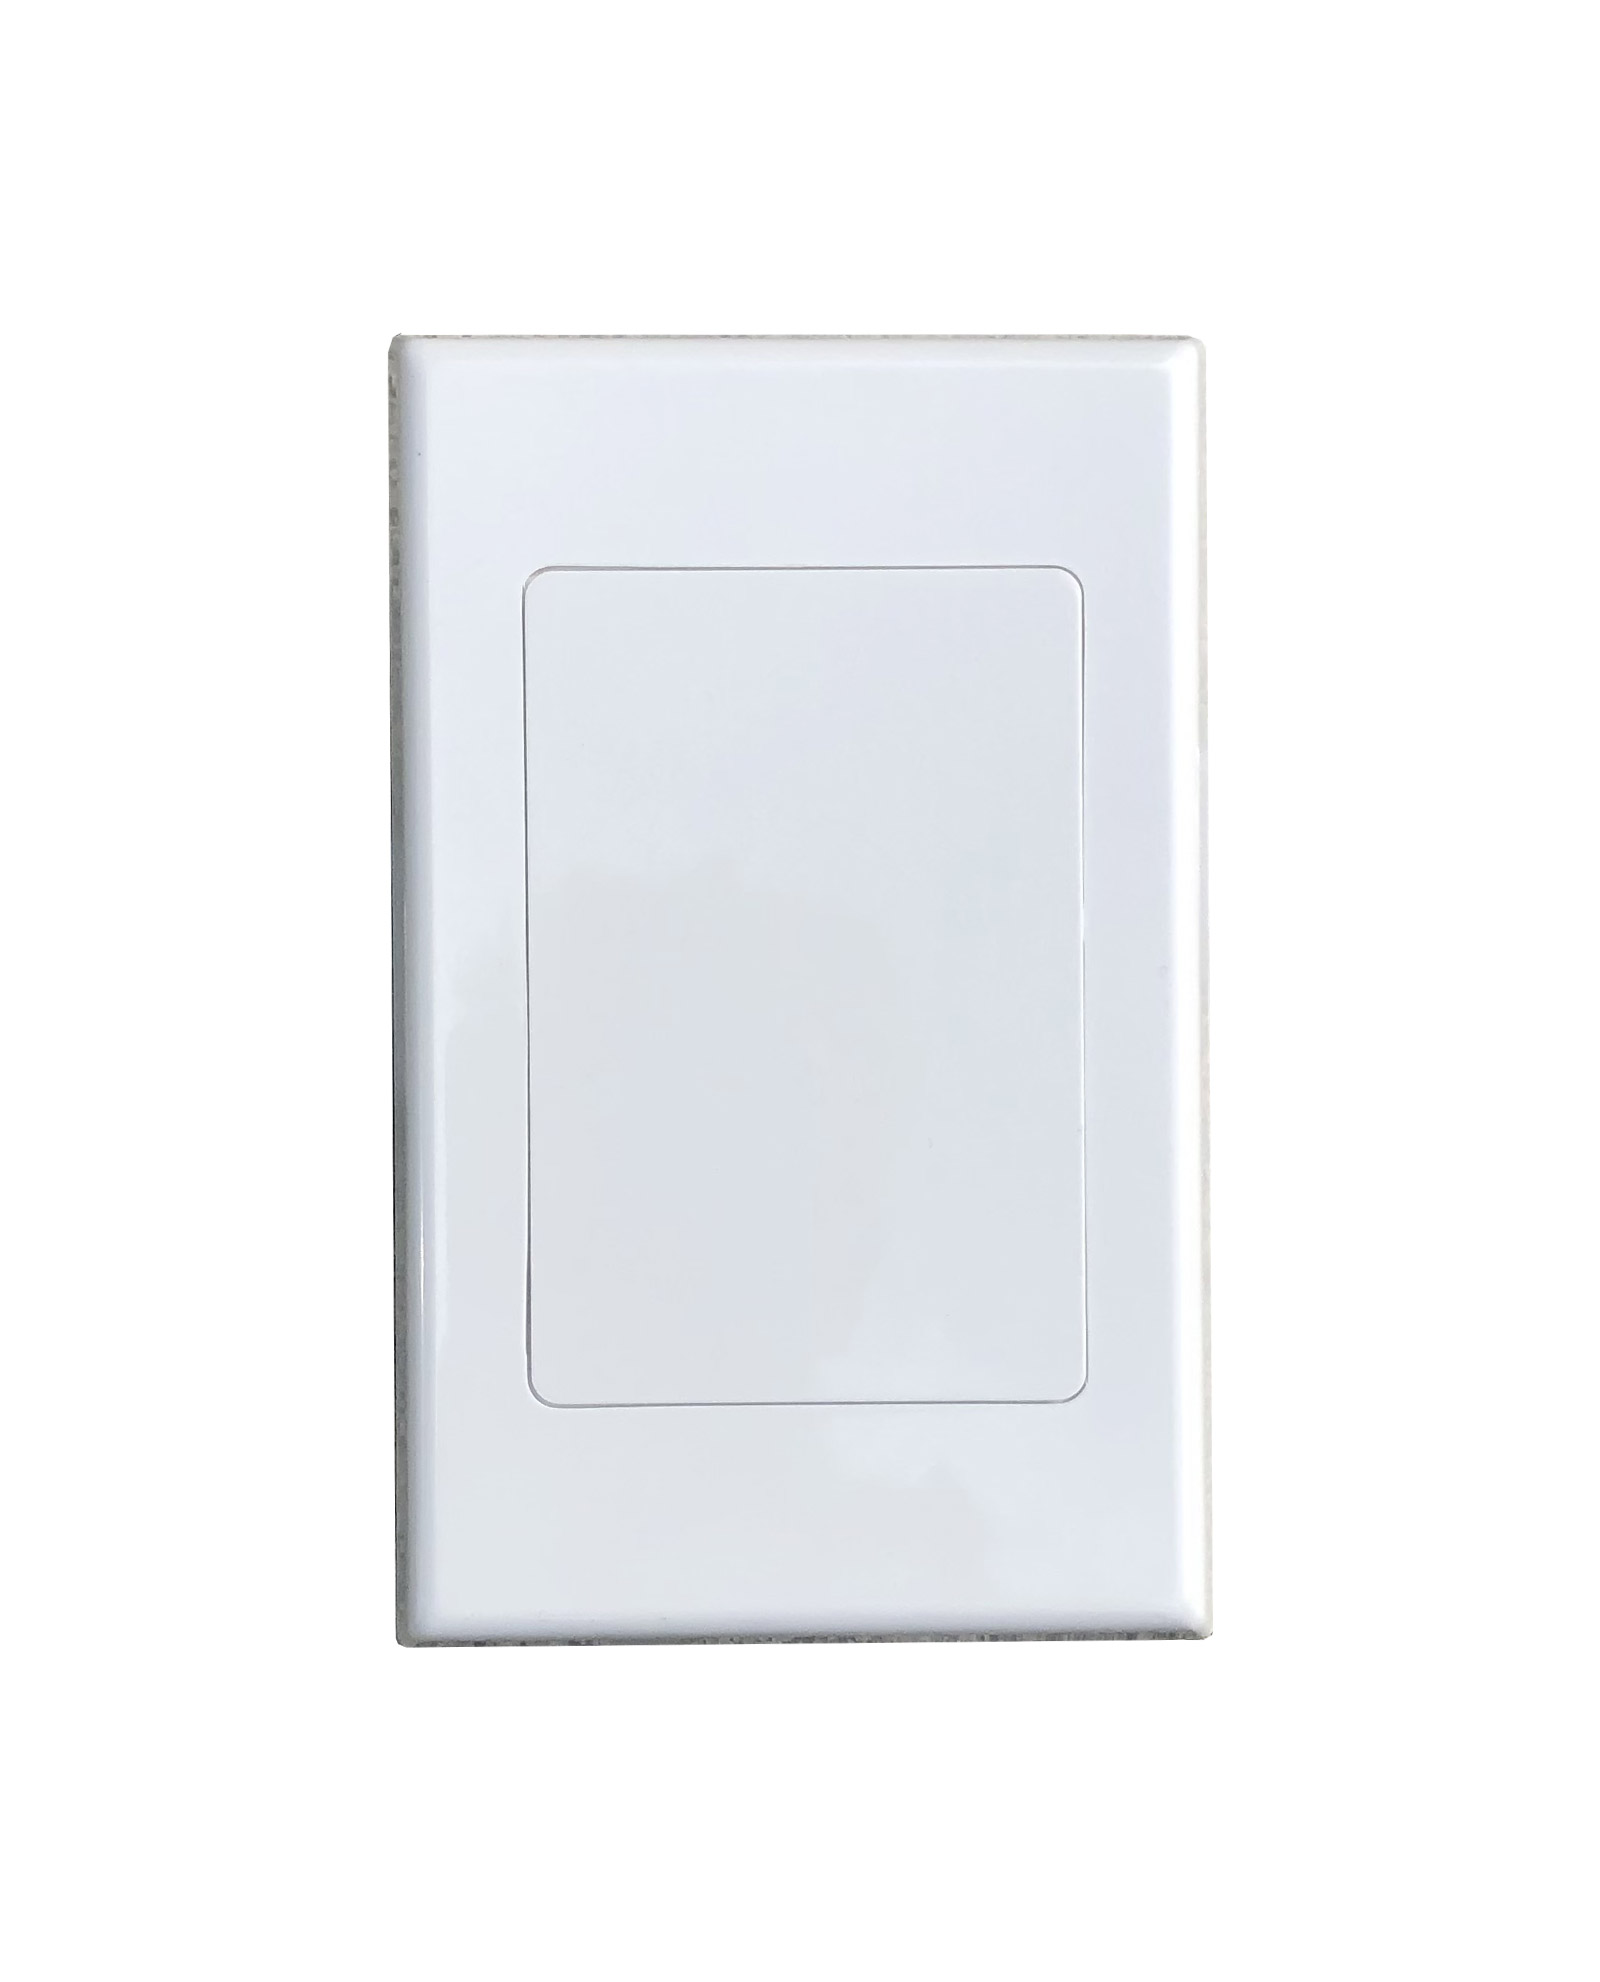 Pdl 600 Series 650vh Blank Cover Plate